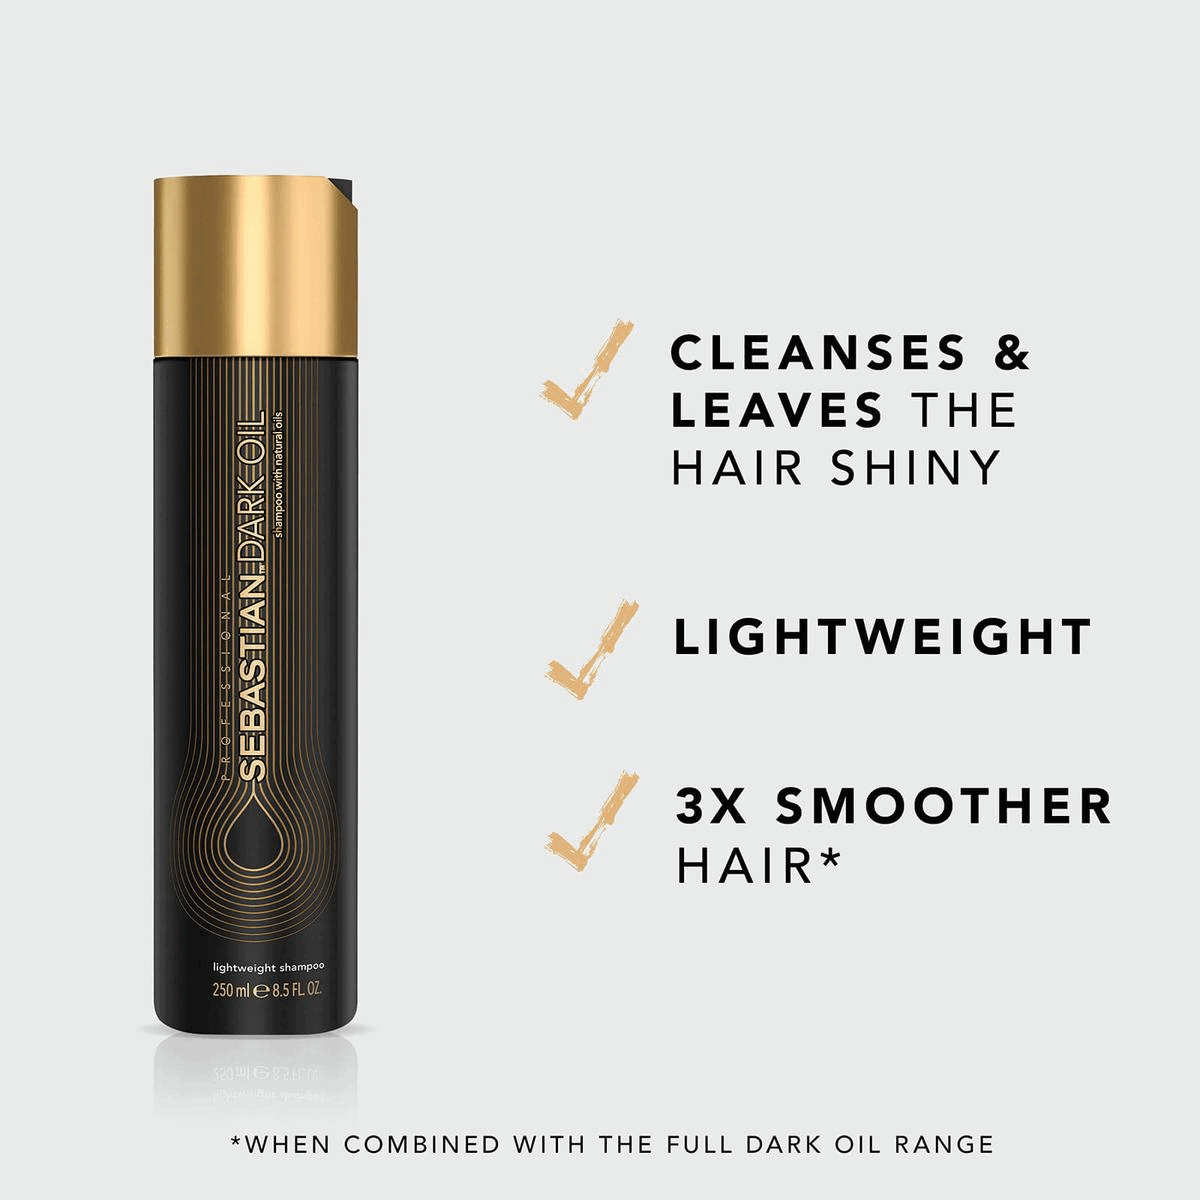 Cleanses & leaves the hair shiny Lightweight 3x smoother hair* * when combined with the full dark oil. How to use Massage the shampoo into wet hair Rinse thoroughly
            Repeat if necessary. Jojoba & argan oil